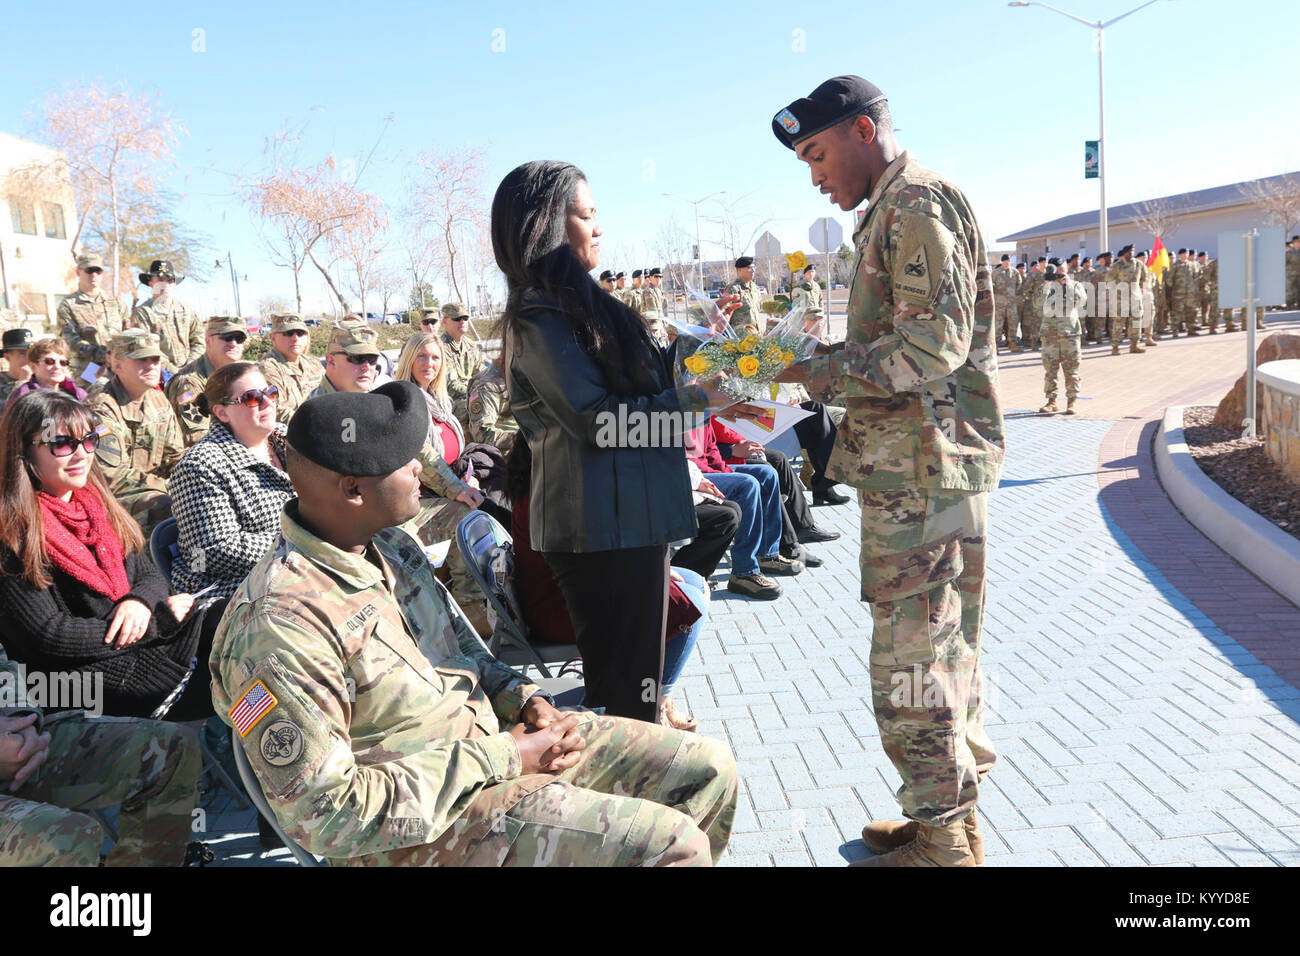 Diana Oliver, wife of Command Sgt. Maj. Michael Oliver, incoming senior enlisted adviser for 3rd Armored Brigade Combat Team, 1st Armored Division, receives yellow roses from Spc. William R. Ford, human resources specialist with Headquarters and Headquarters Company, 3 ABCT, 1 AD, during the brigade's change of responsibility ceremony January 11, 2018 to welcome her to the brigade. (U.S. Army Stock Photo